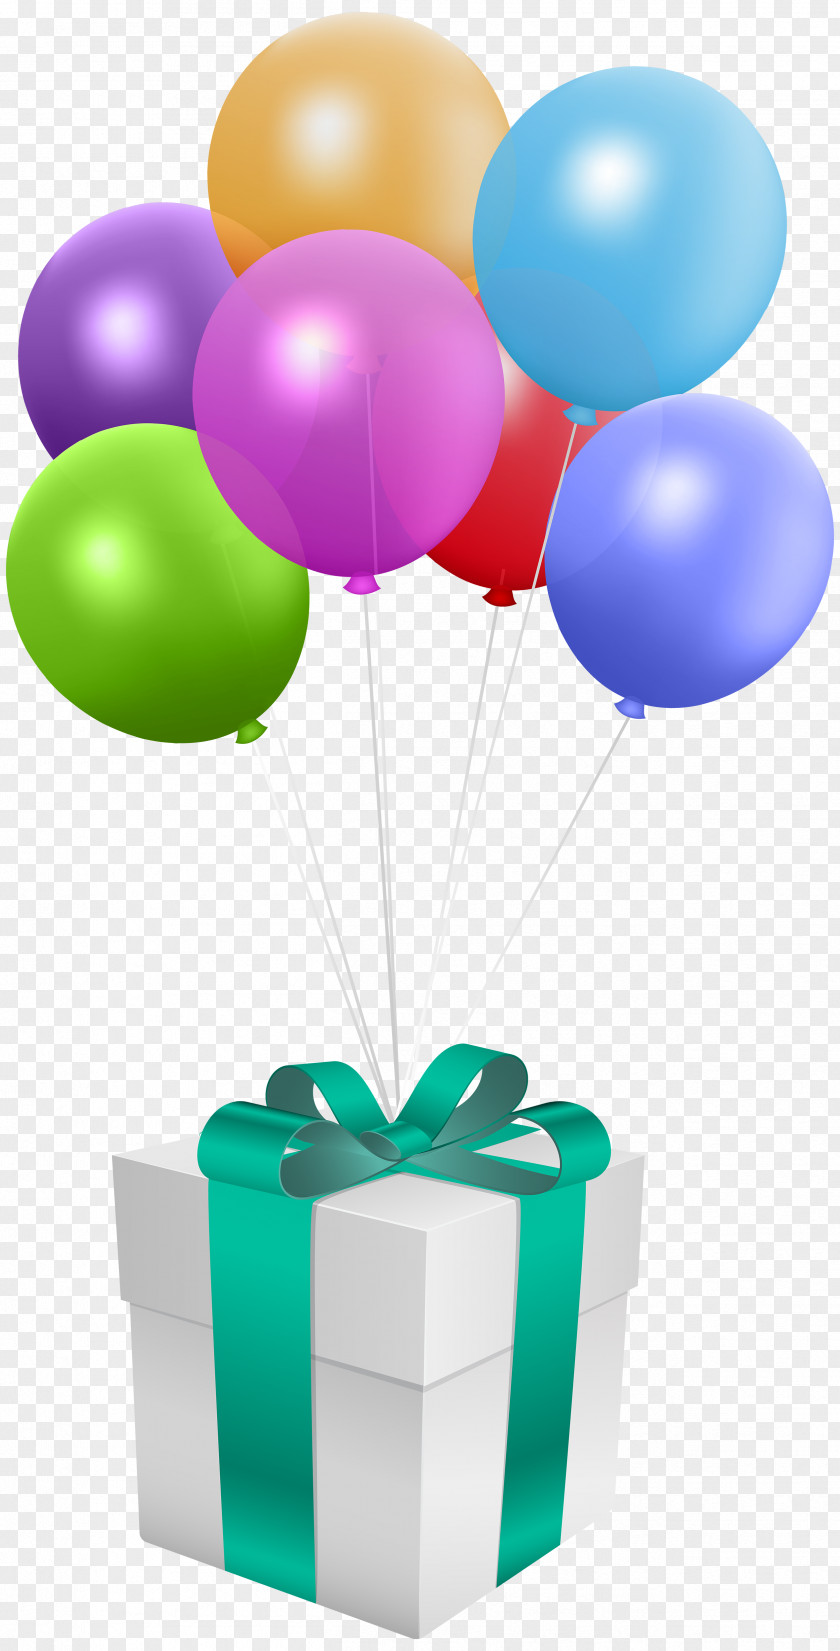 Gift With Balloons Transparent Clip Art Image Balloon Birthday PNG